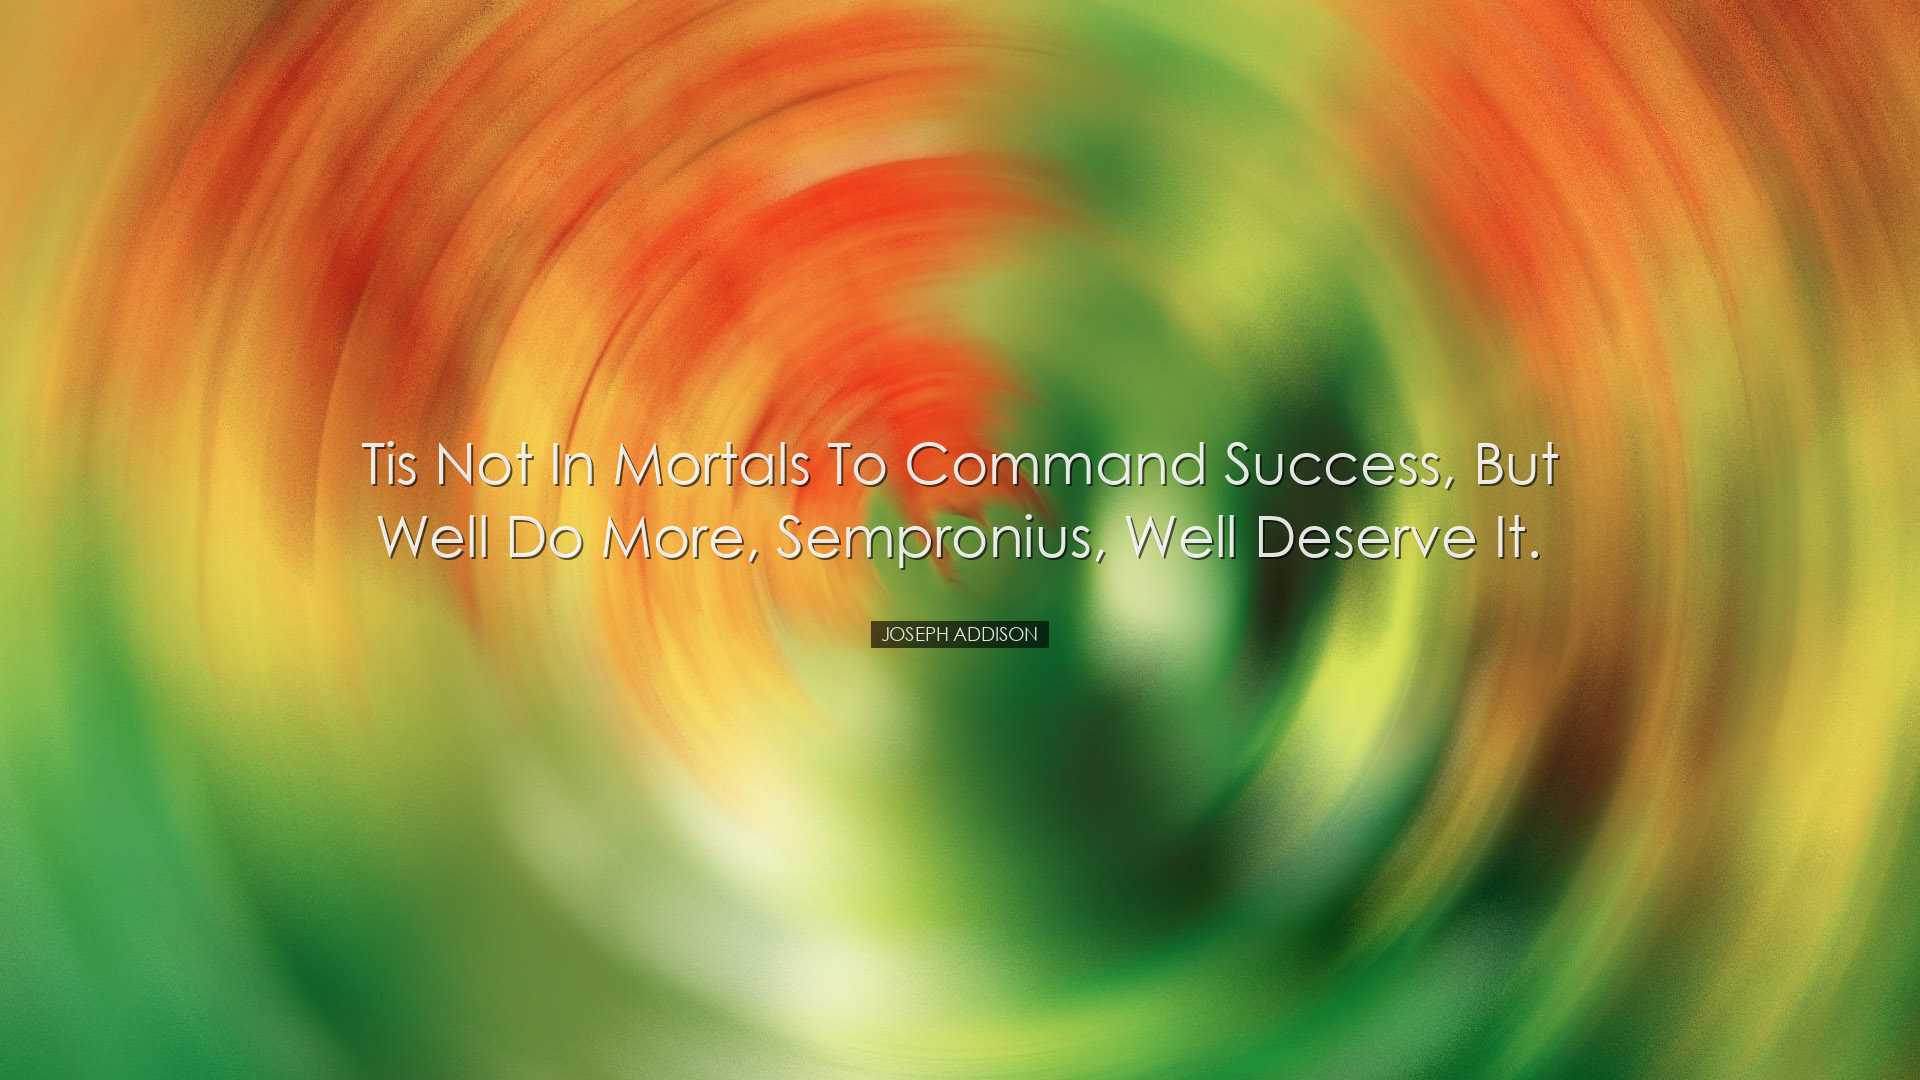 Tis not in mortals to command success, but well do more, Semproniu